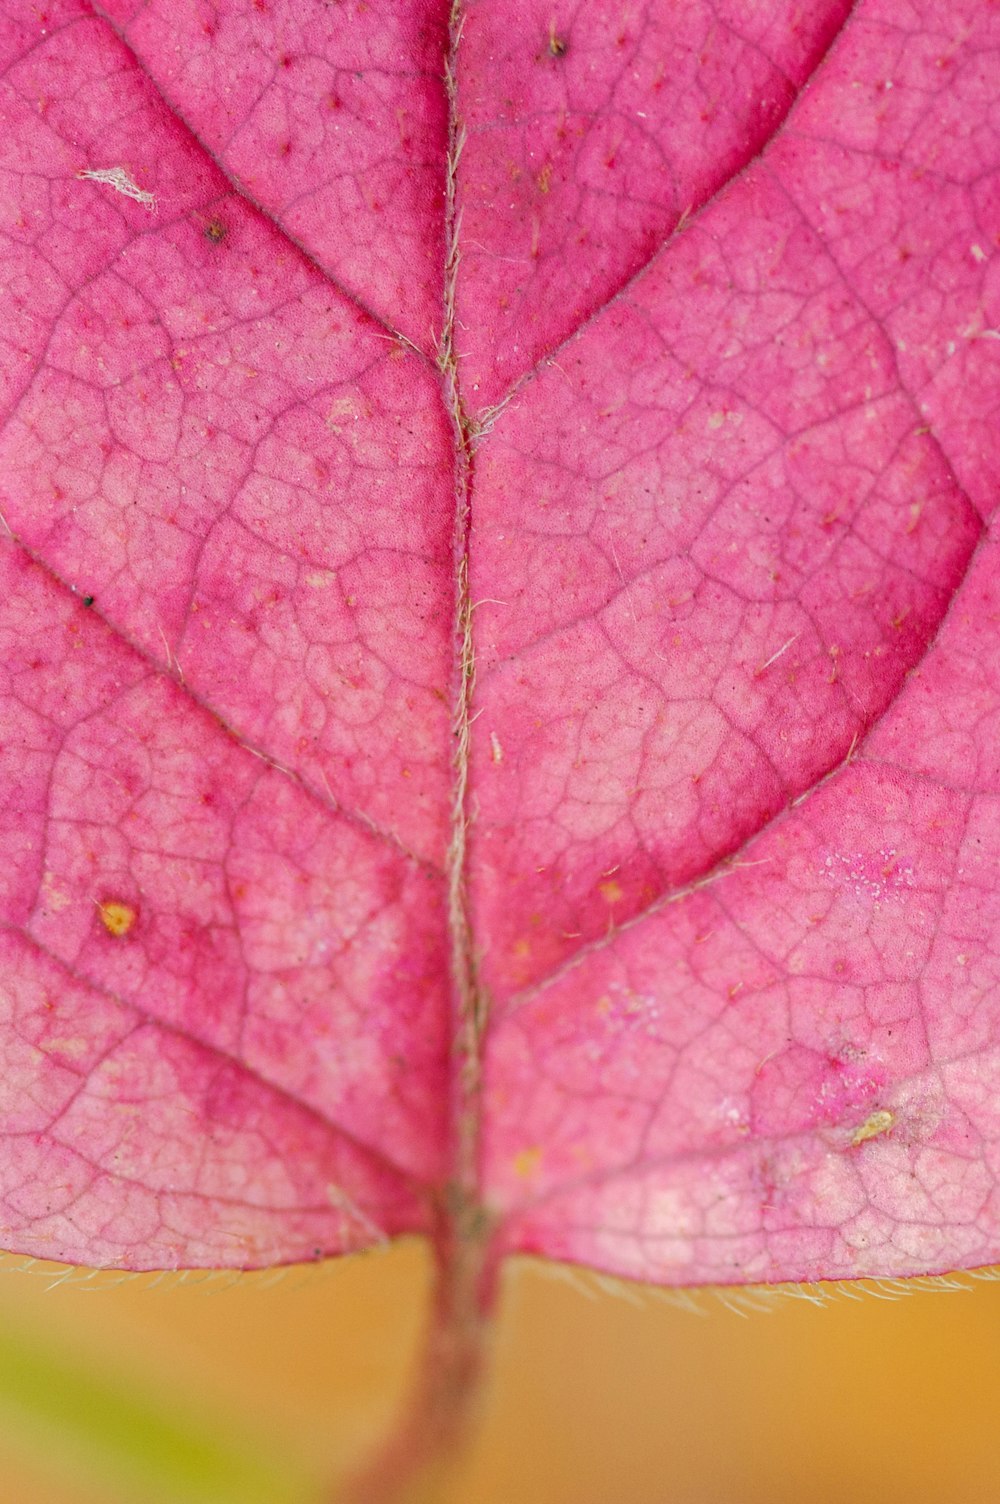 pink leaf with water droplets